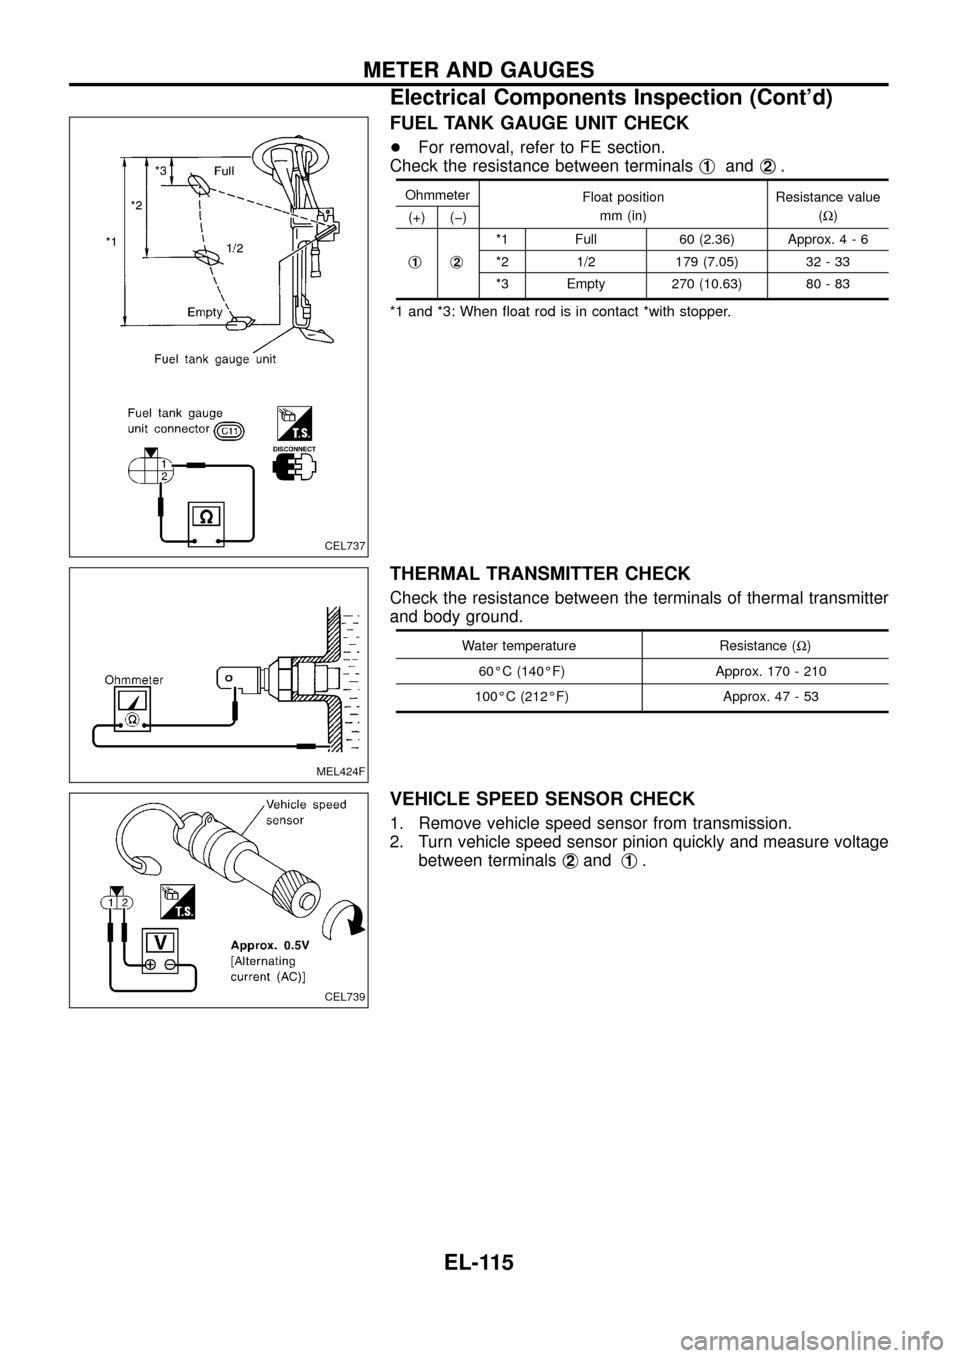 NISSAN PATROL 1998 Y61 / 5.G Electrical System User Guide FUEL TANK GAUGE UNIT CHECK
+For removal, refer to FE section.
Check the resistance between terminalsj
1andj2.
Ohmmeter
Float position
mm (in)Resistance value
(W)
(+) (þ)
j
1j2
*1 Full 60 (2.36) Appro